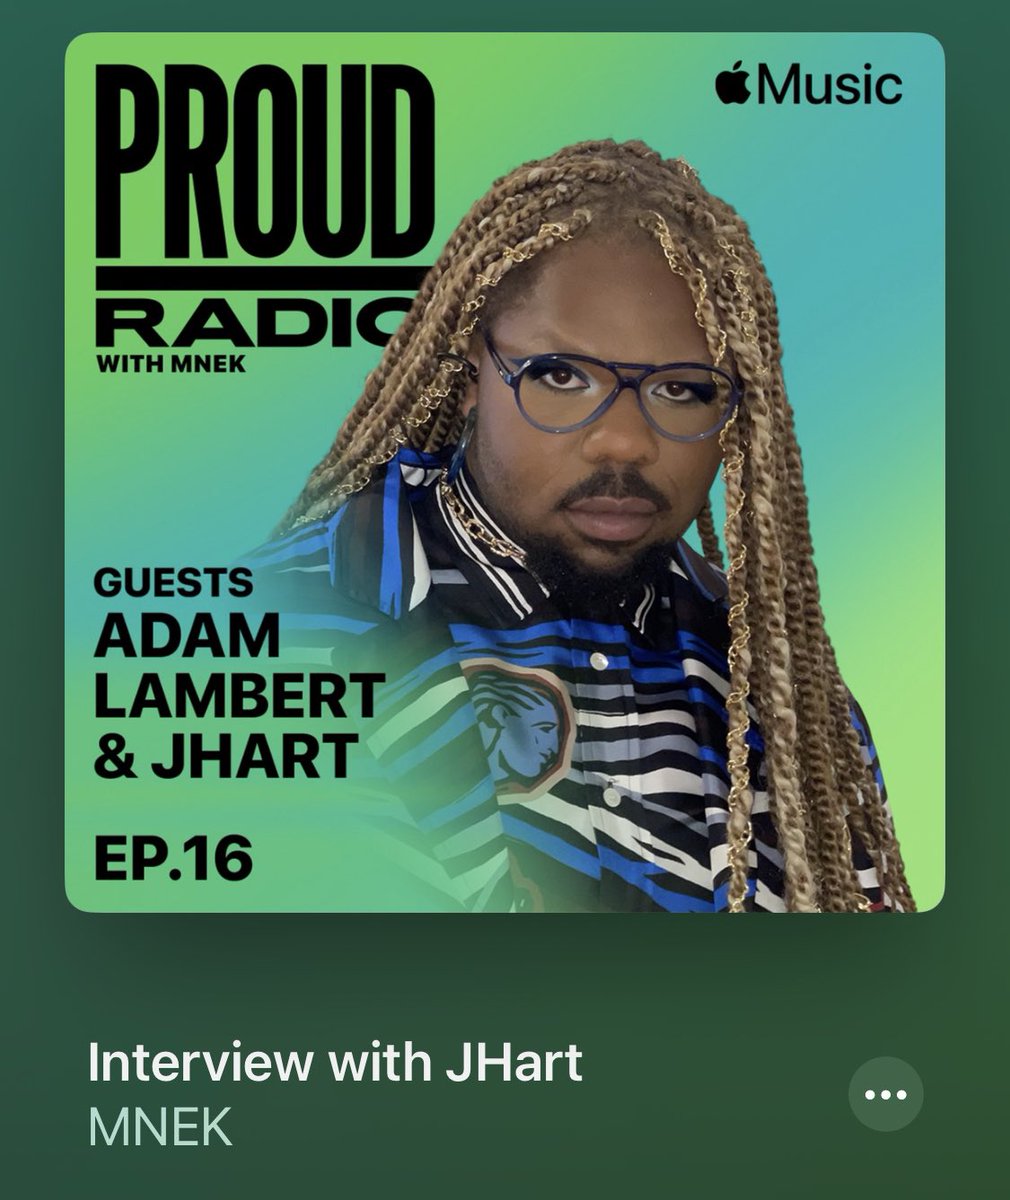 @jhartmusic features I’m Proud Radio with @mnek a great interview! JHart mentions a live show for the upcoming EP around early November!! Listen: music.apple.com/gb/station/ada…